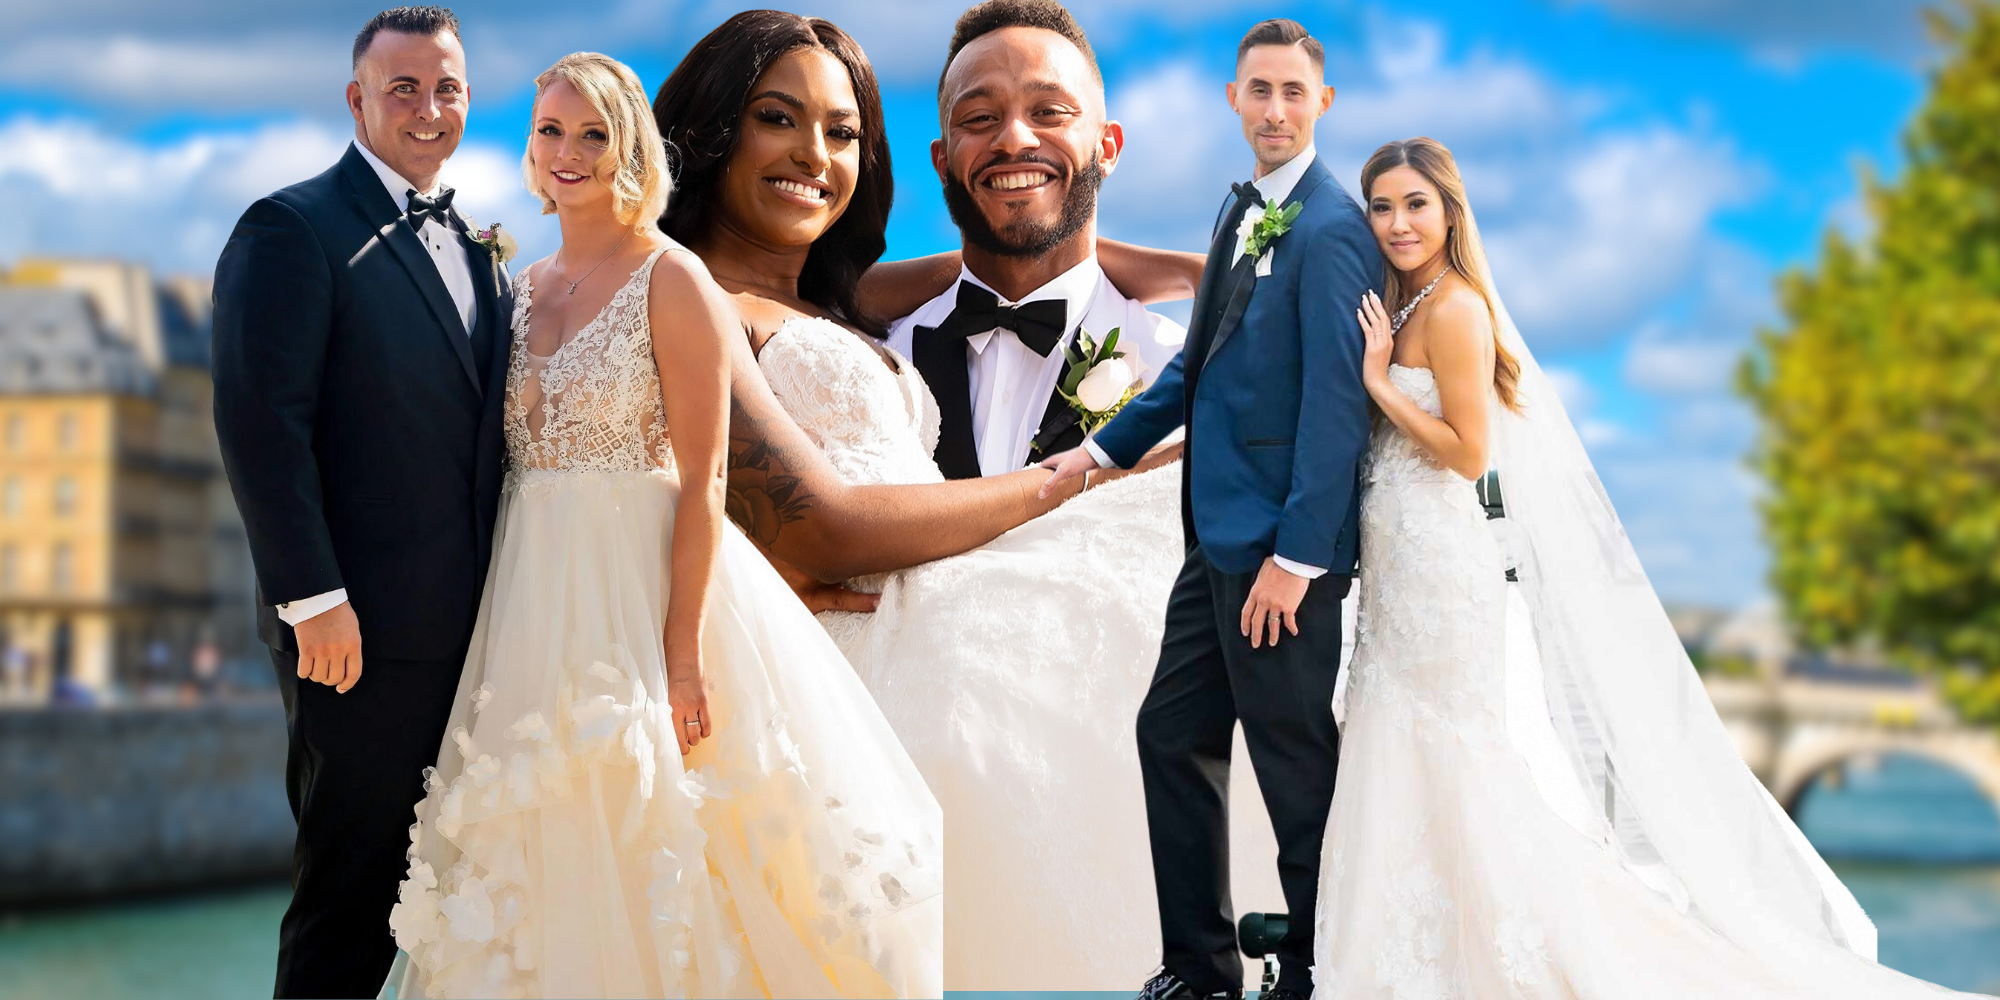 Married At First Sight Season 14 Boston couples in wedding attire